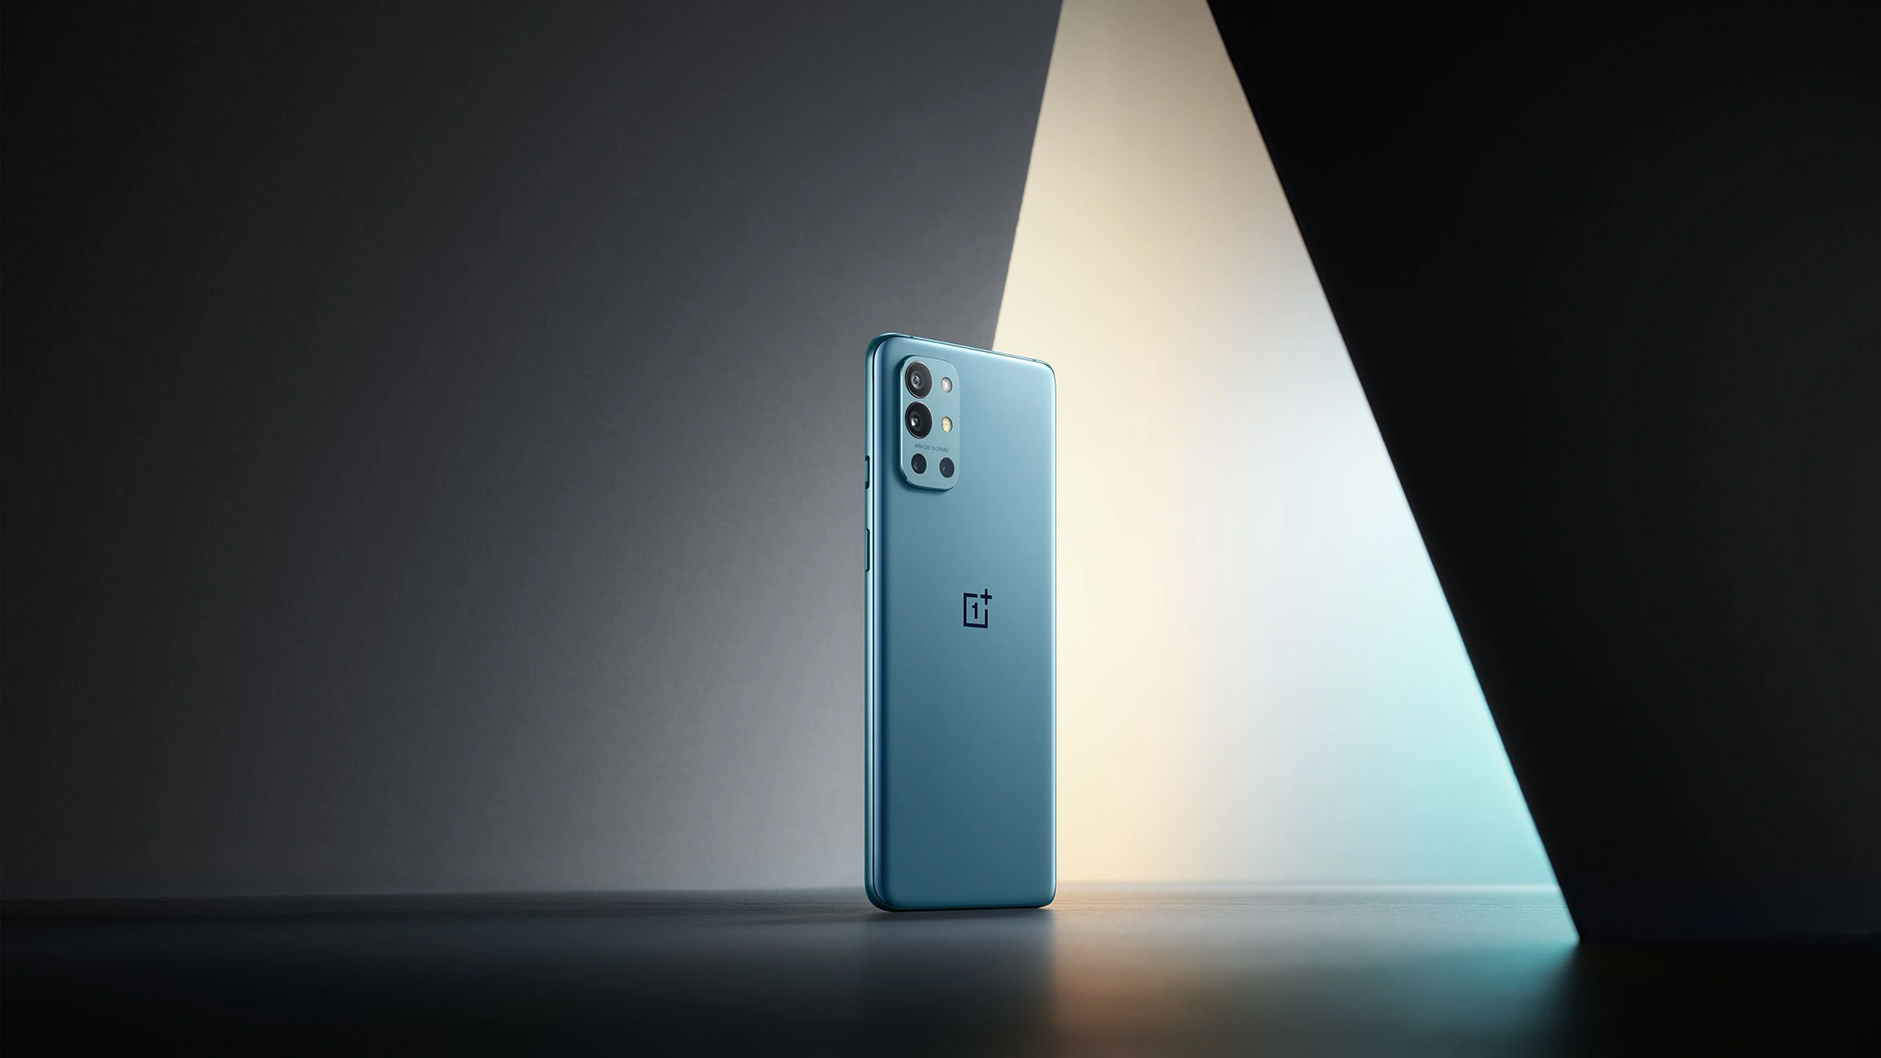 Snapdragon 870, 50-megapixel Sony IMX766 sensor and Android 12 - OnePlus 9RT specifications revealed